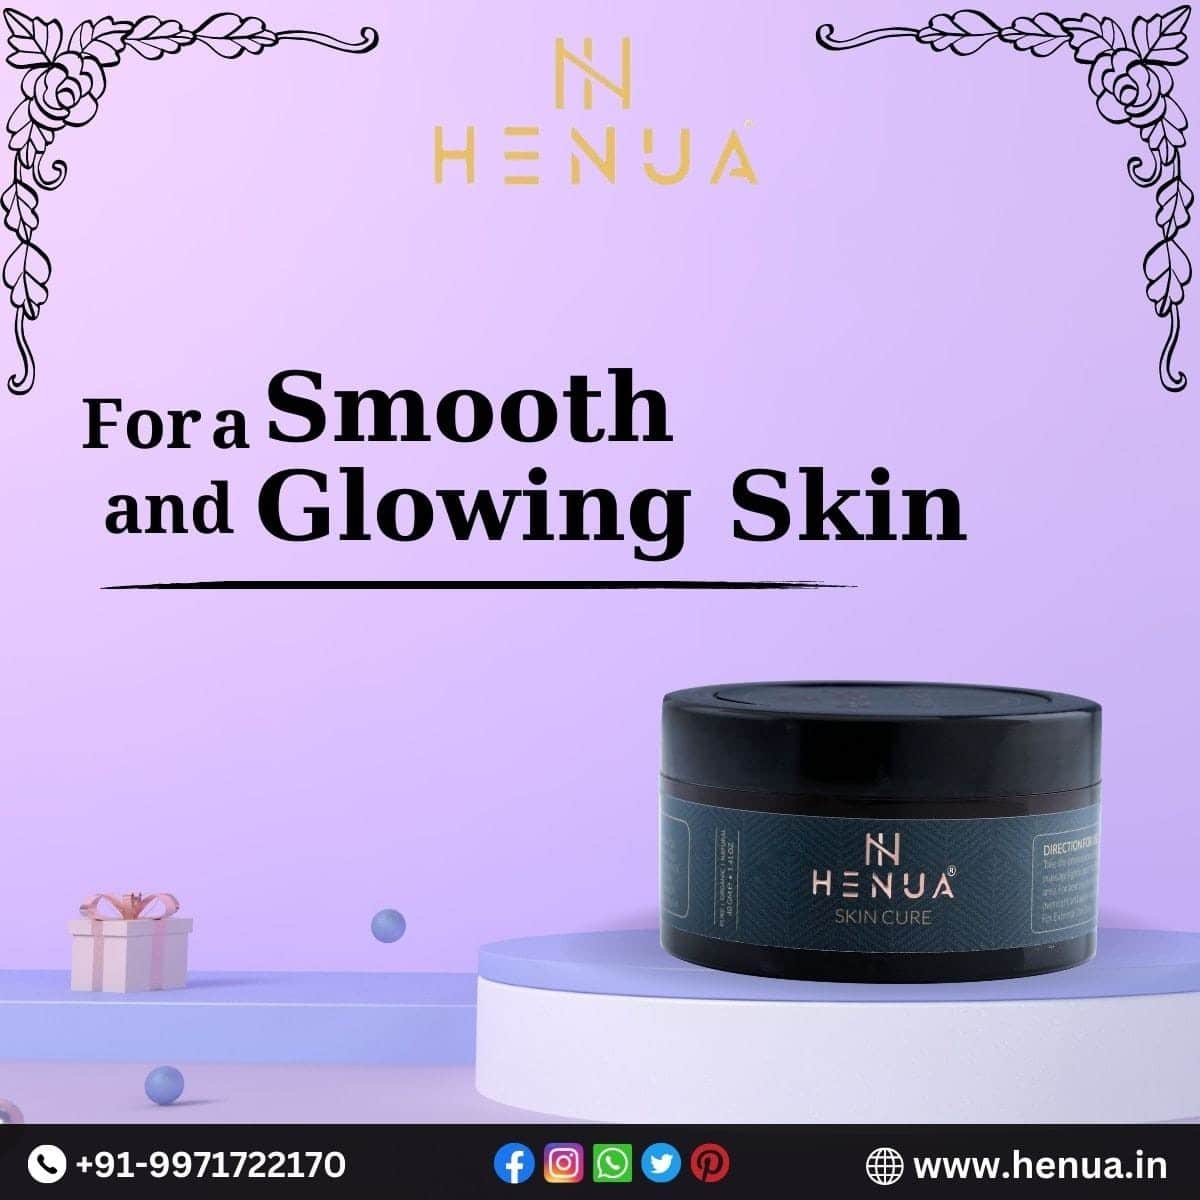 Henua-Skin-Cure-For-Smooth-And-Glowing-Skin-Skin-Care